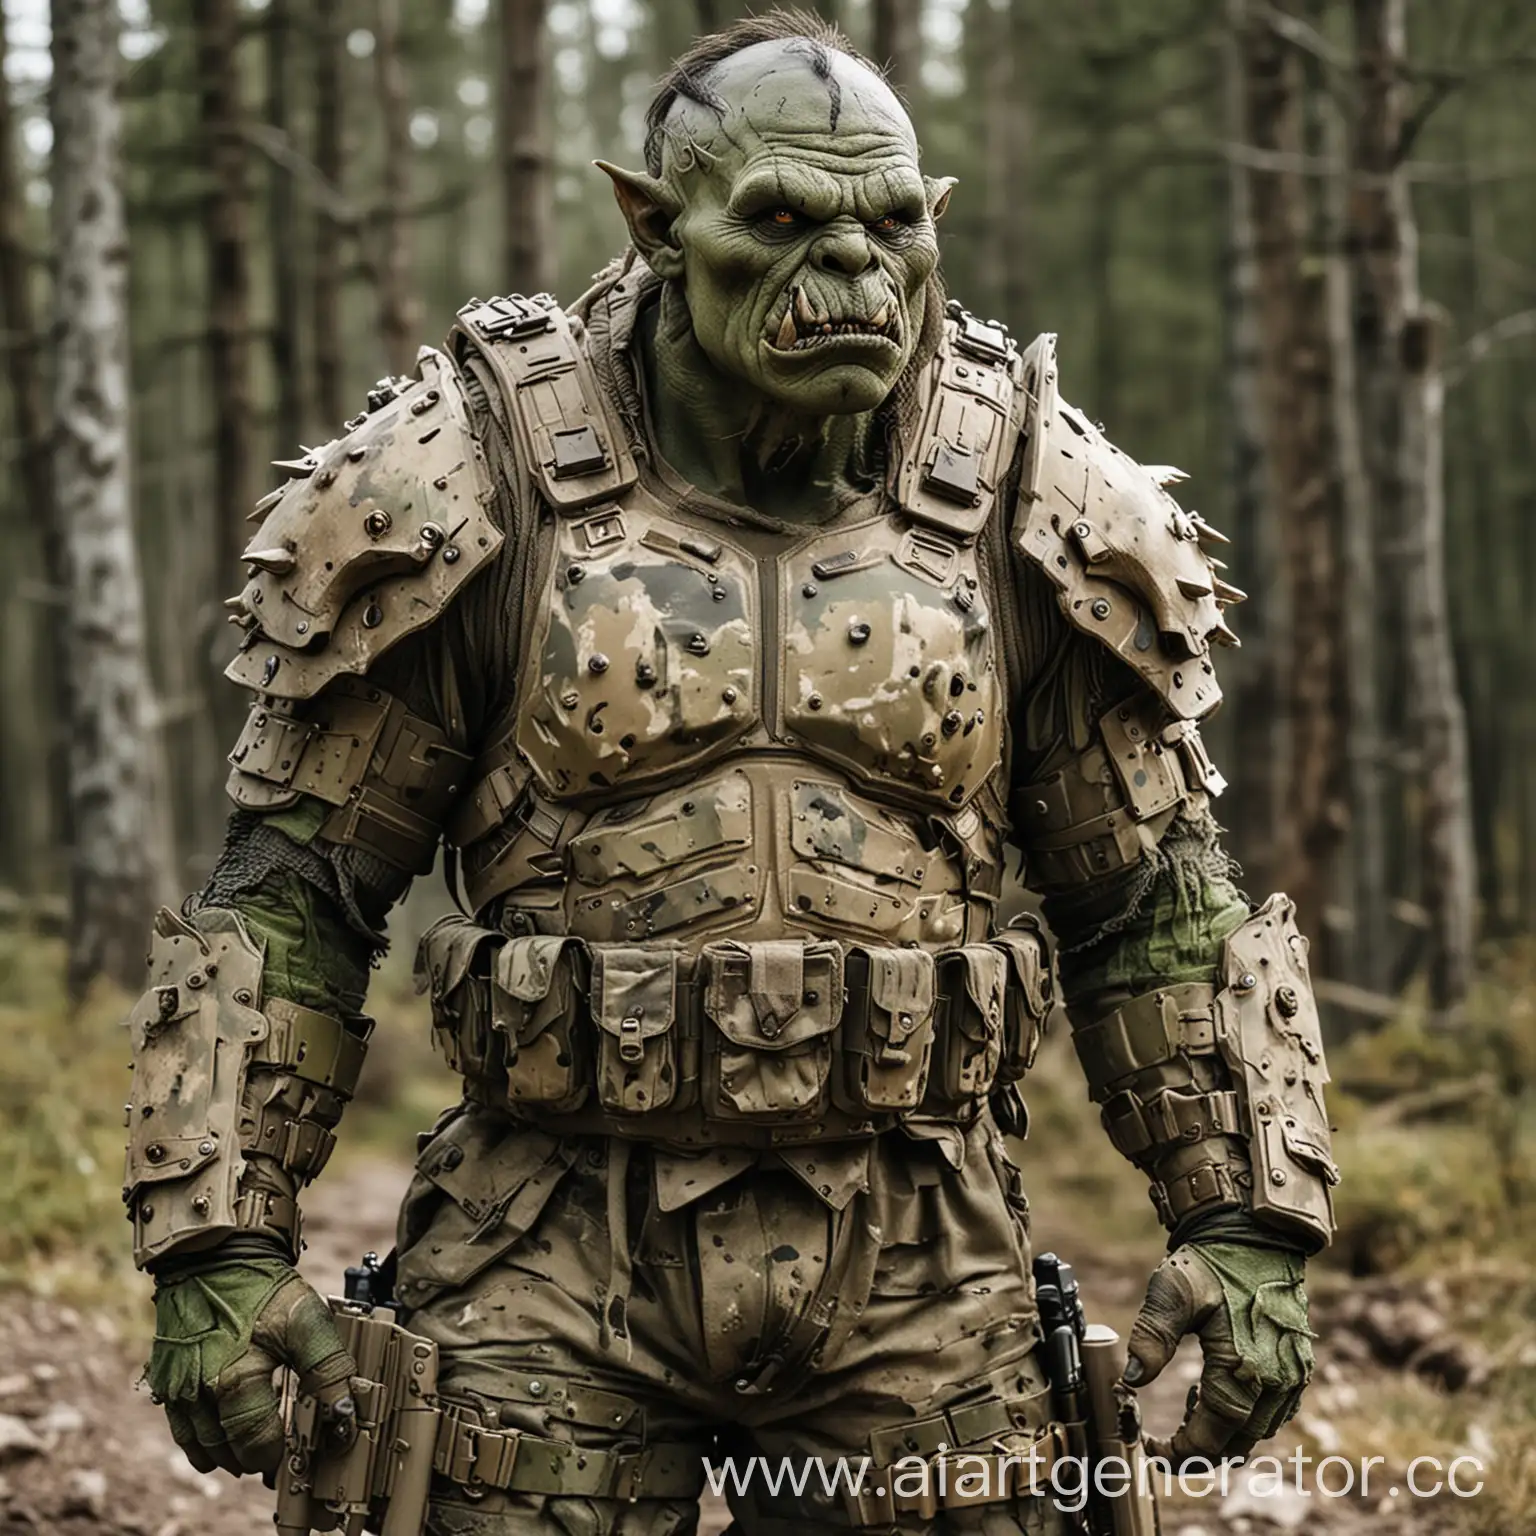 Orc-in-Multicam-Camouflage-Blending-into-Forest-Environment